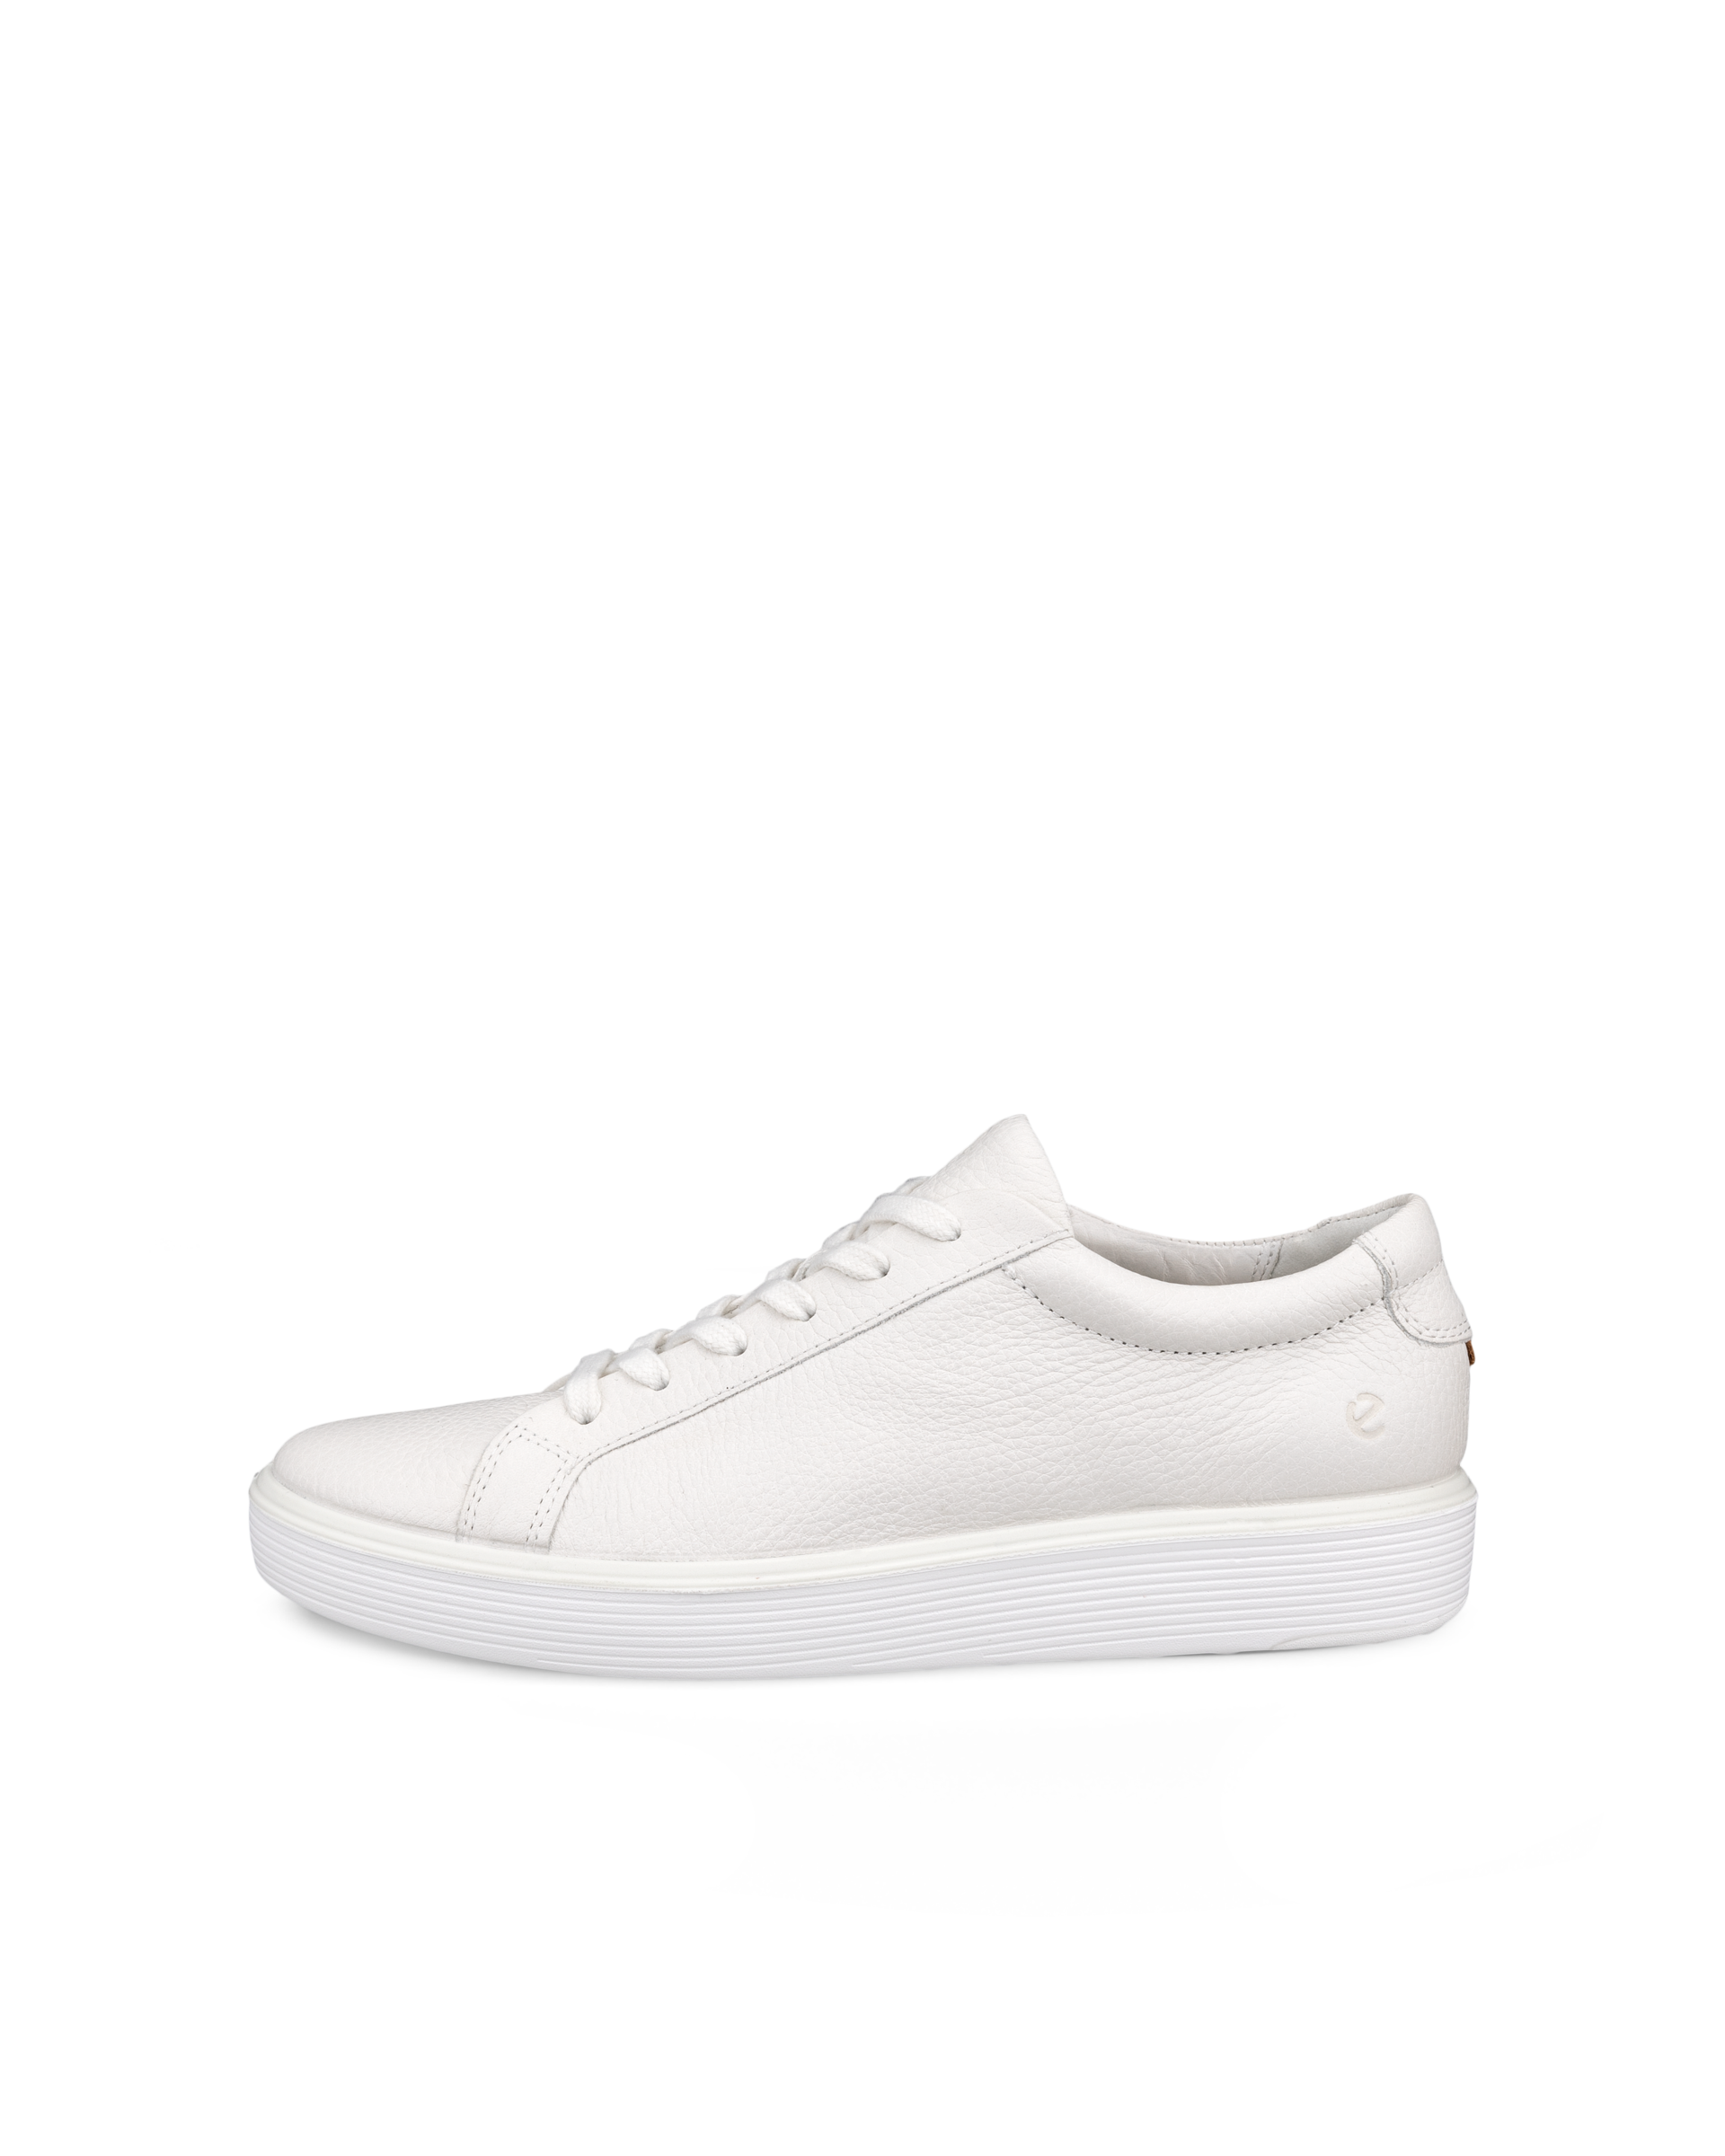 Women's All White Sneakers